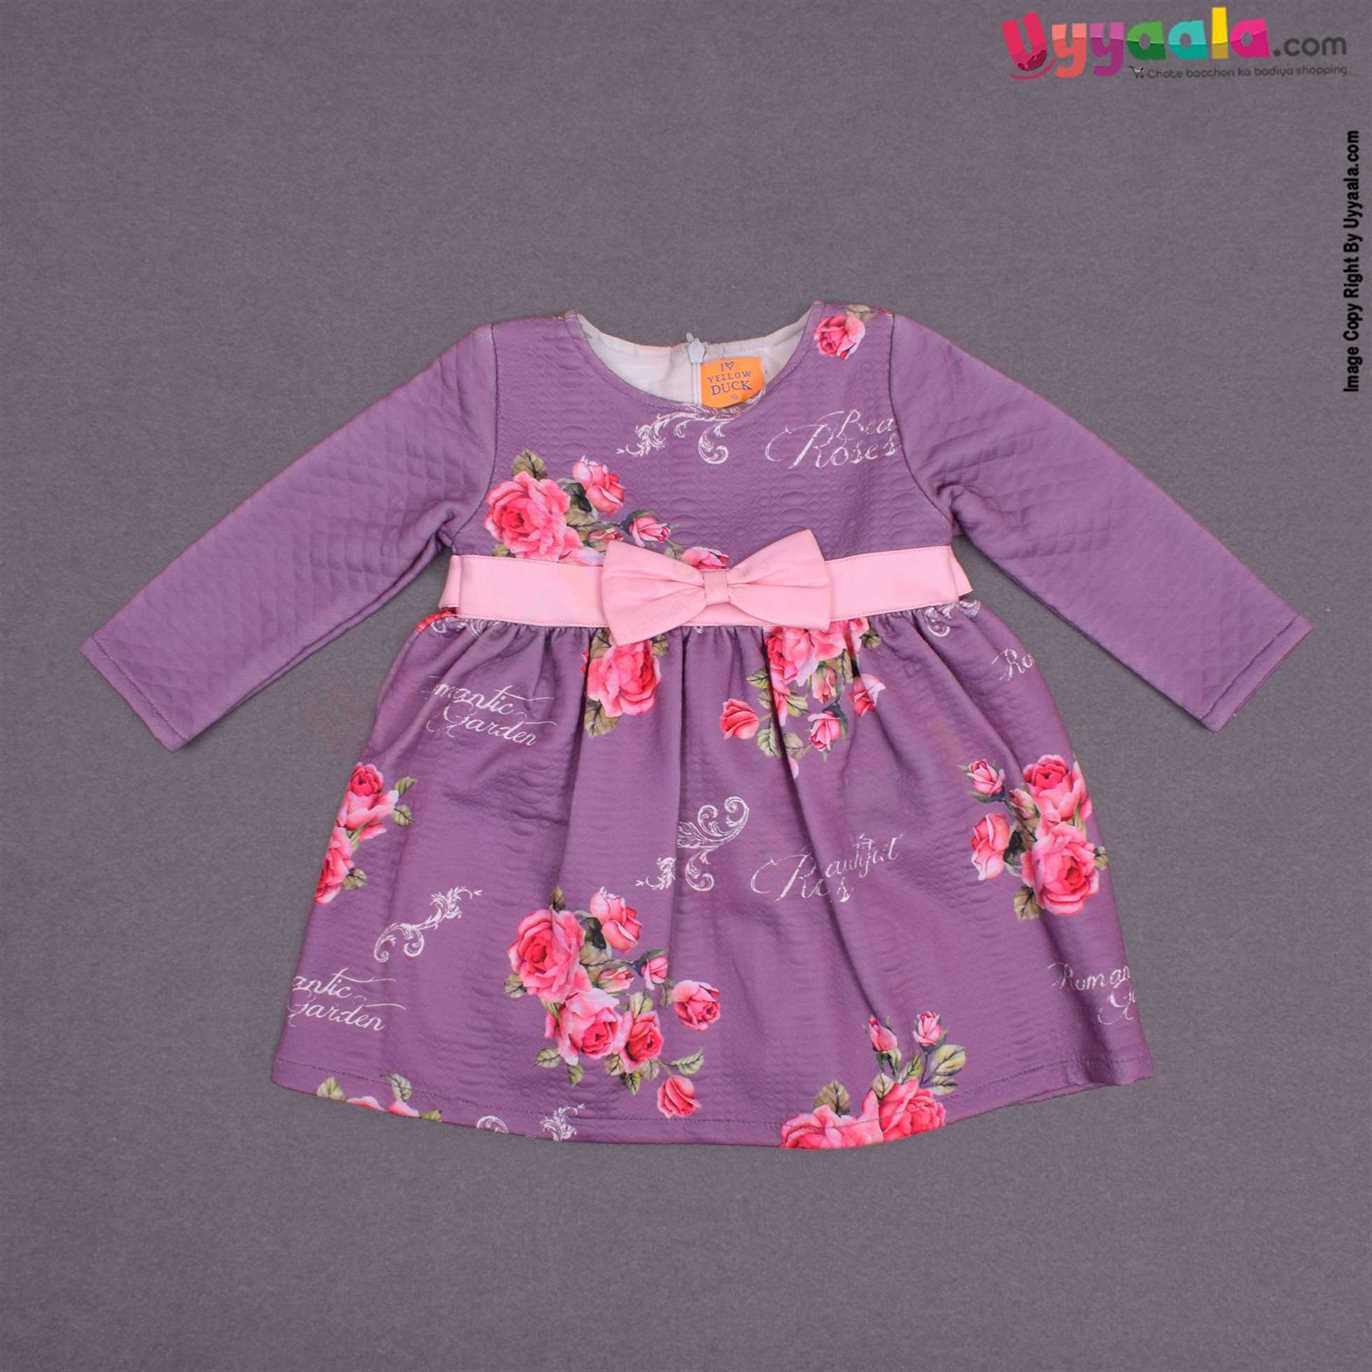 YELLOW DUCK Cotton full sleeve party wear frock for baby girl,back open zip model with bow applique- purple with roses and text print